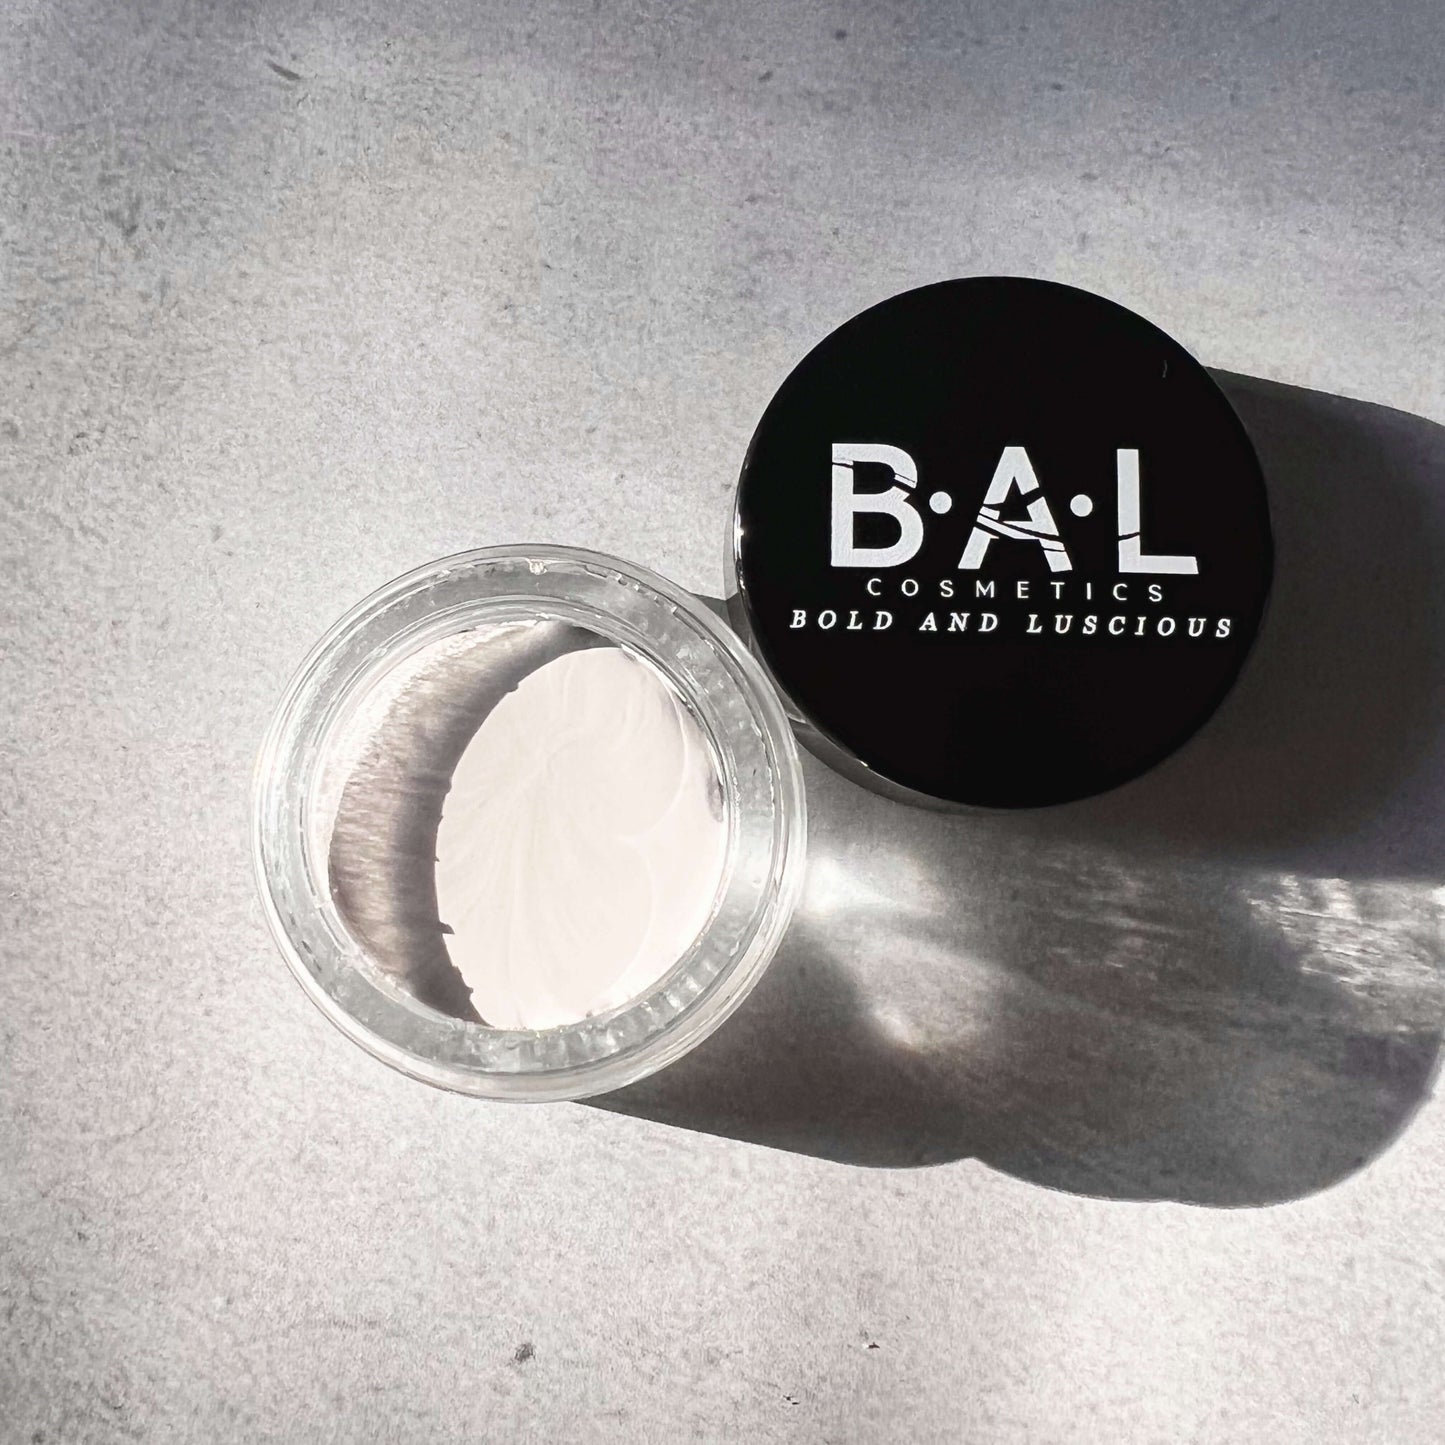 Gel Eyeliner Pot that is White in color inside a glass pot. the Logo for Bold and Luscious Cosmetics is visible on the lid. The texture is soft and creamy.